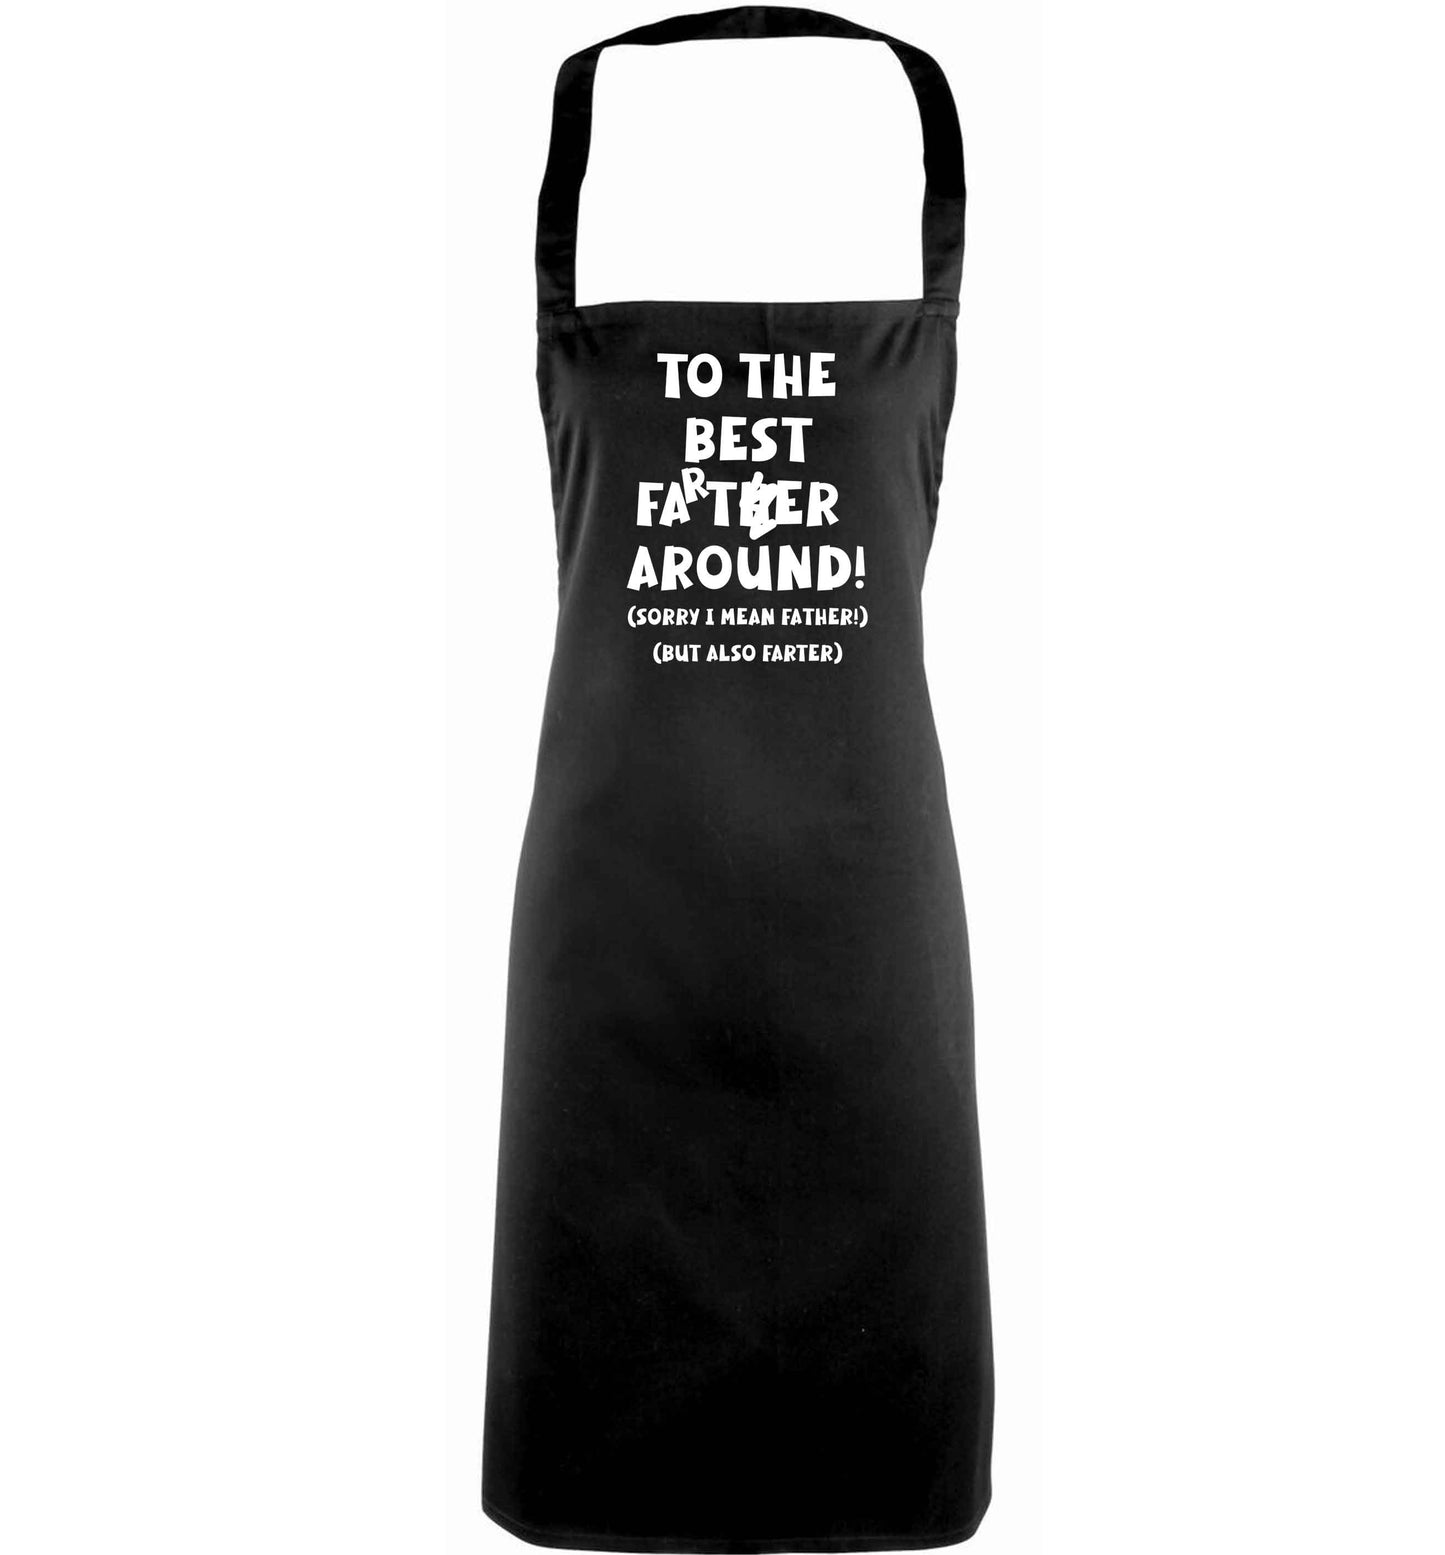 To the best farter around! Sorry I mean father, but also farter adults black apron